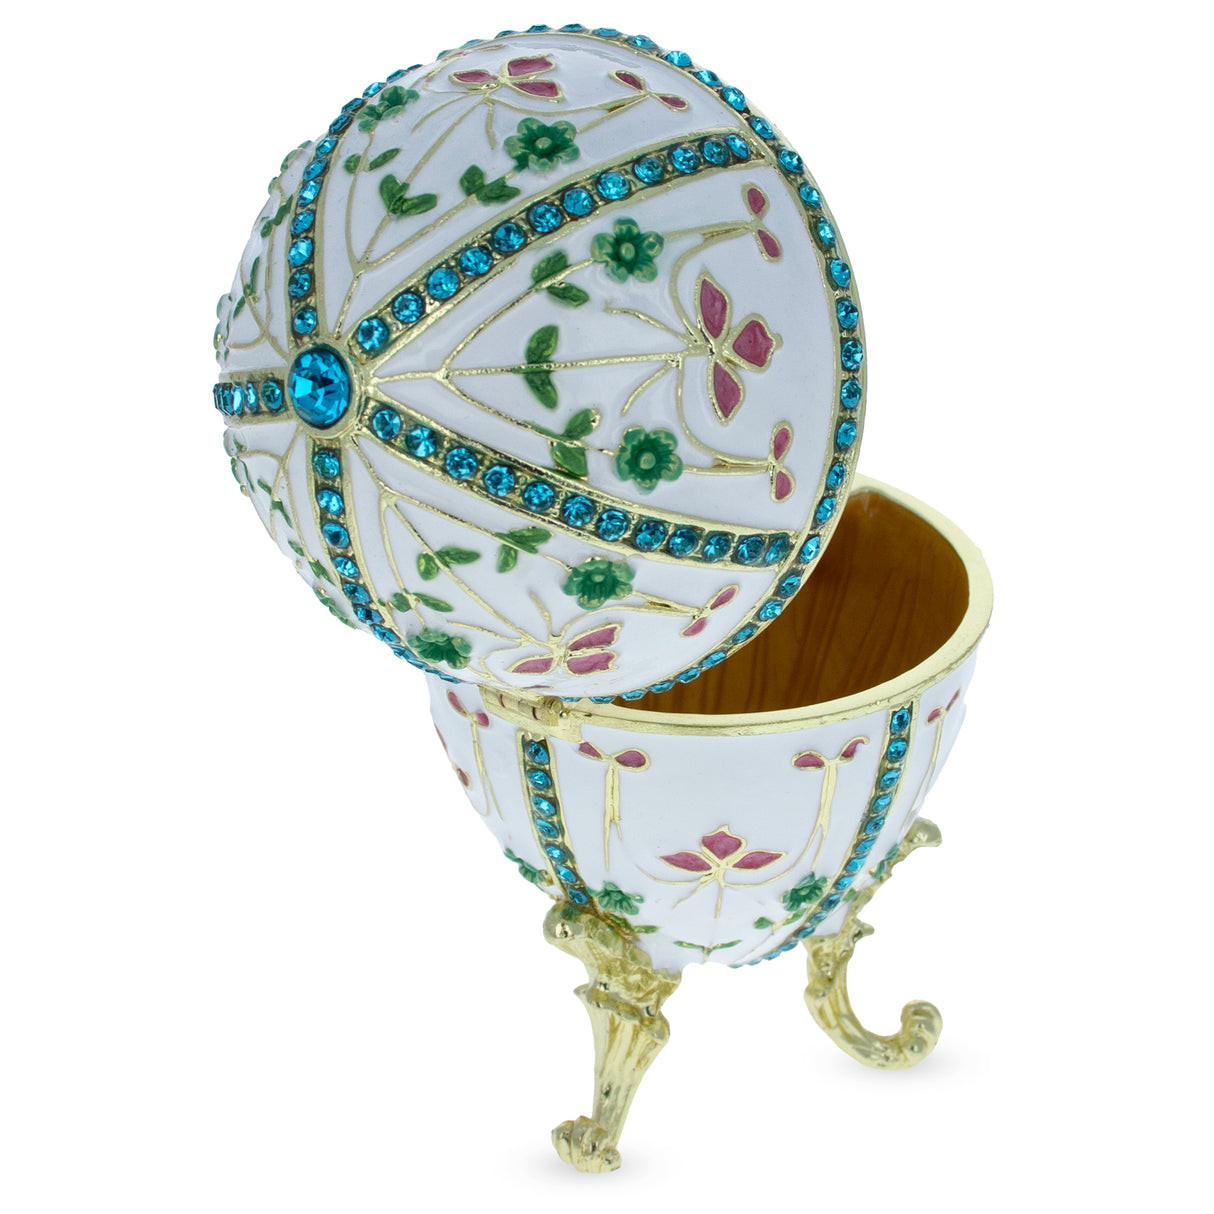 1901 Gatchina Palace Royal Imperial Easter Egg ,dimensions in inches: 3.9 x 2.4 x 2.4